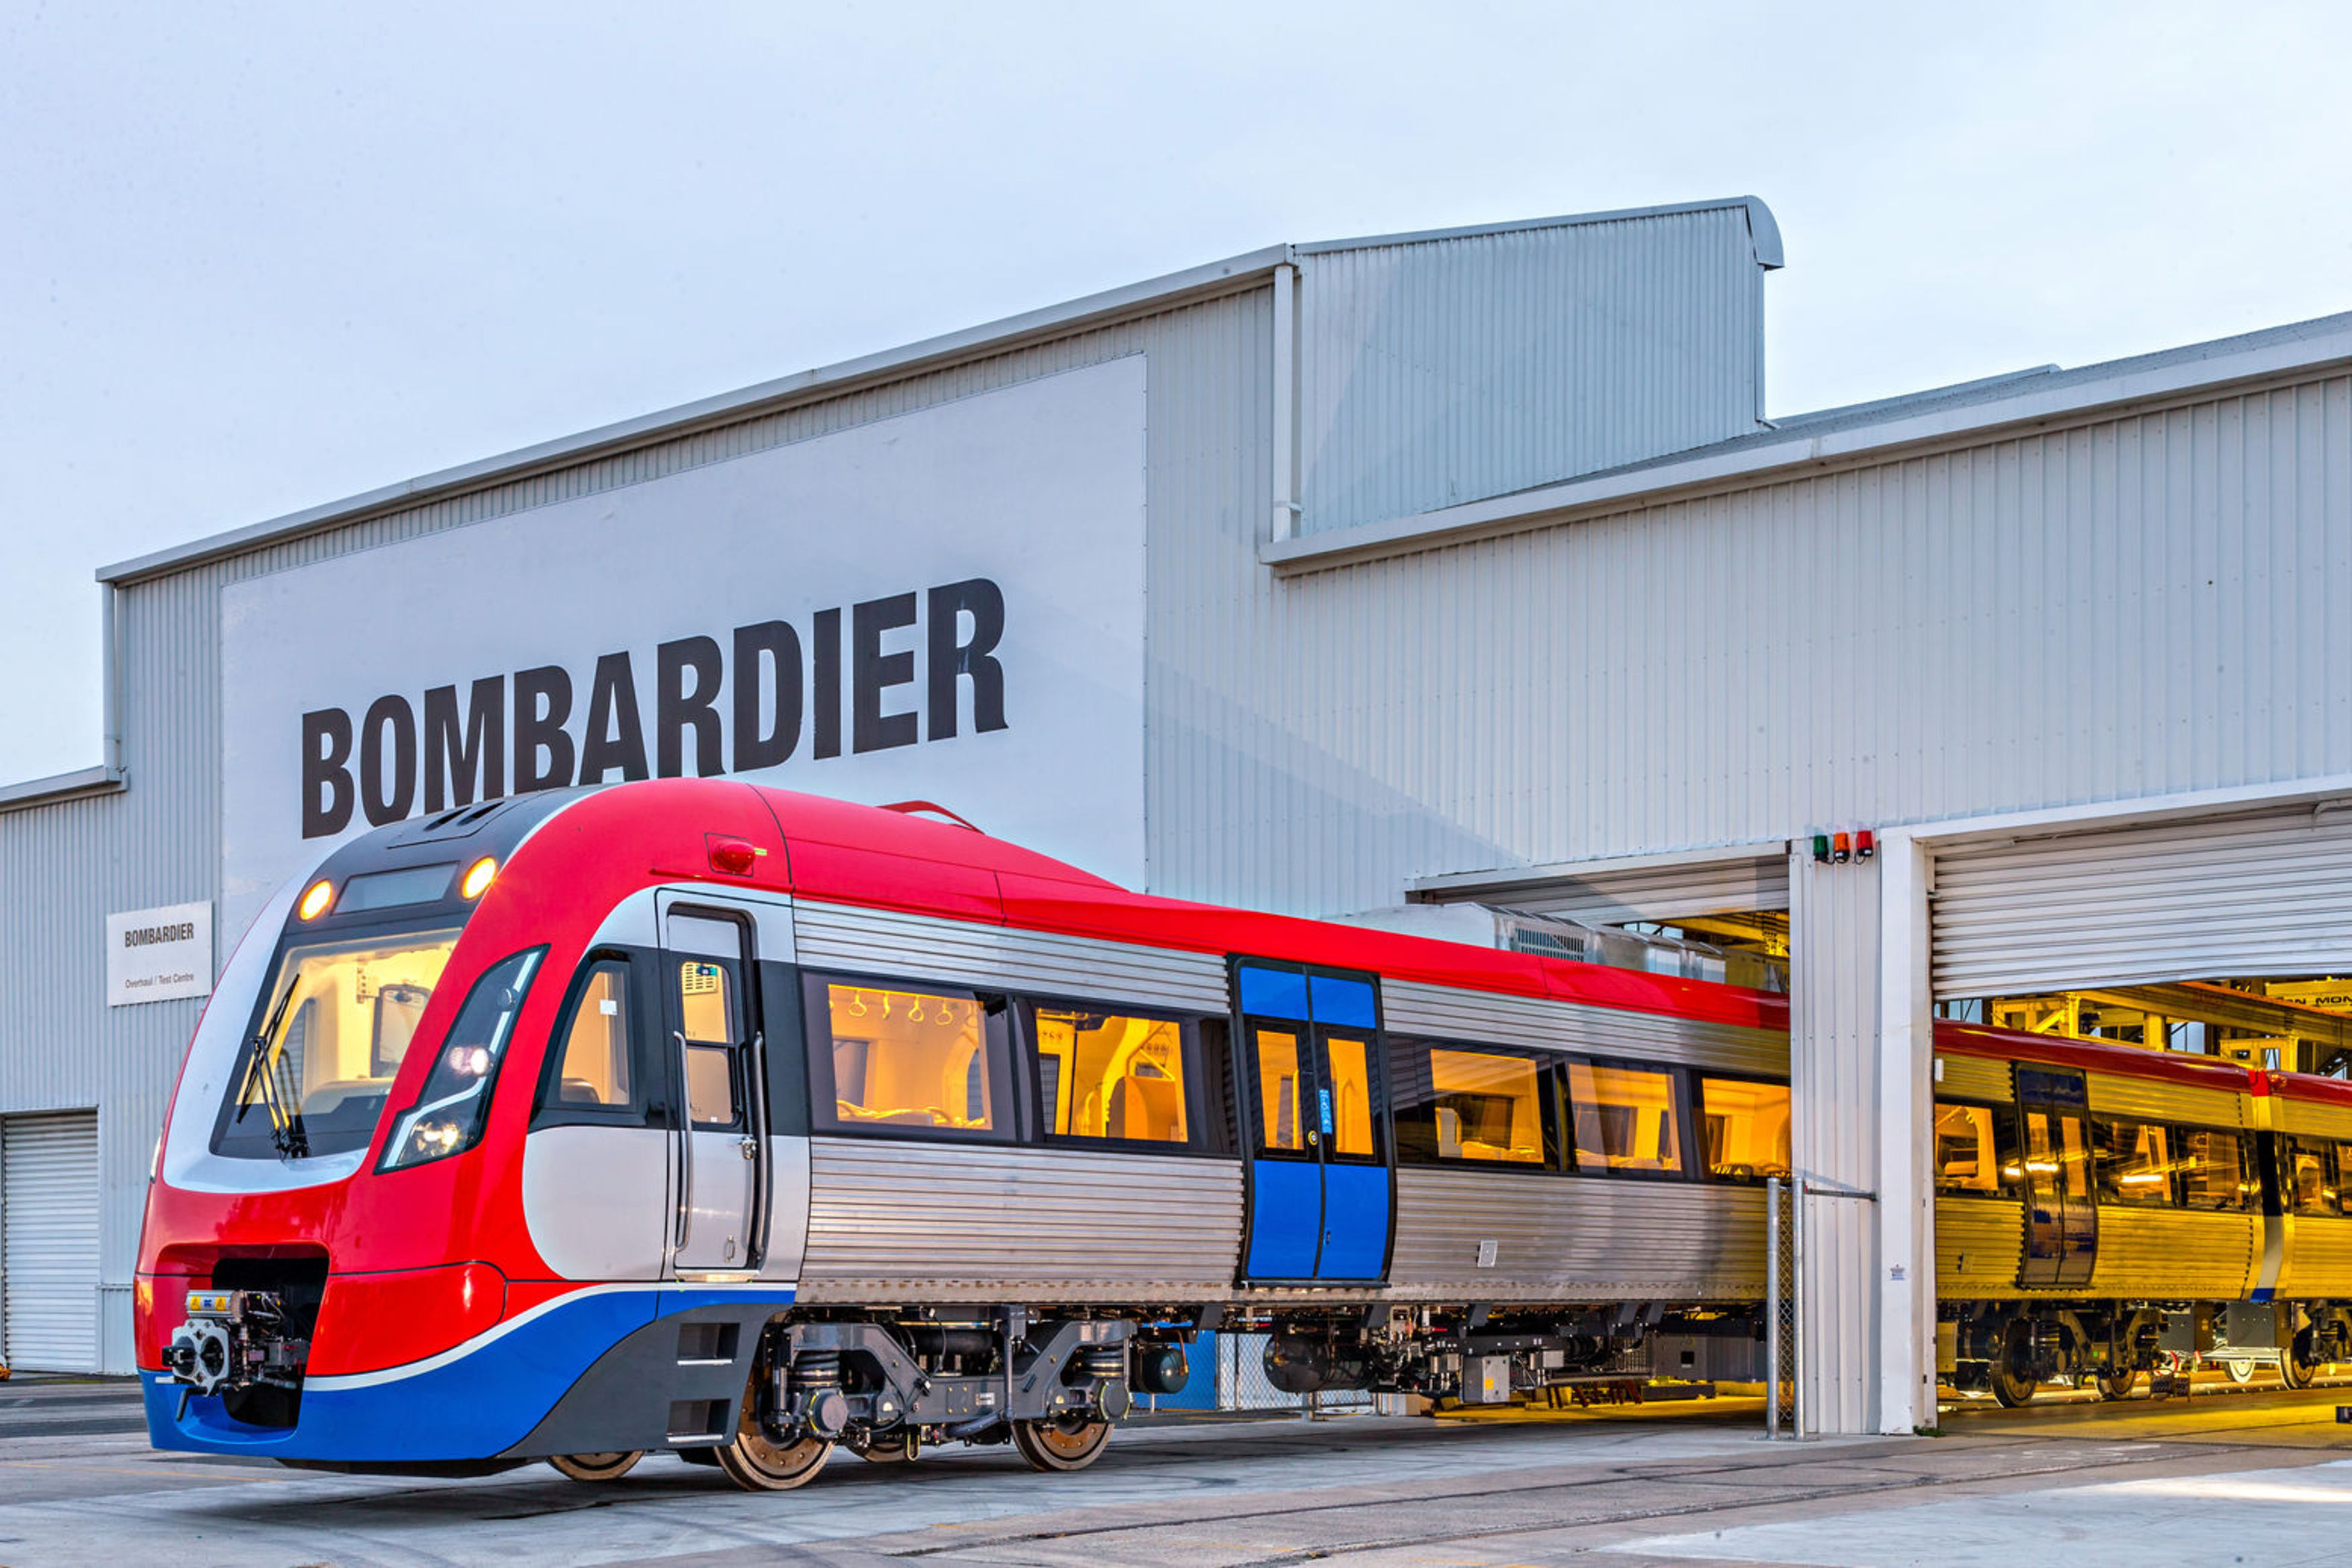 Bombardier wins order to supply 12 commuter trains for Adelaide, Australia1